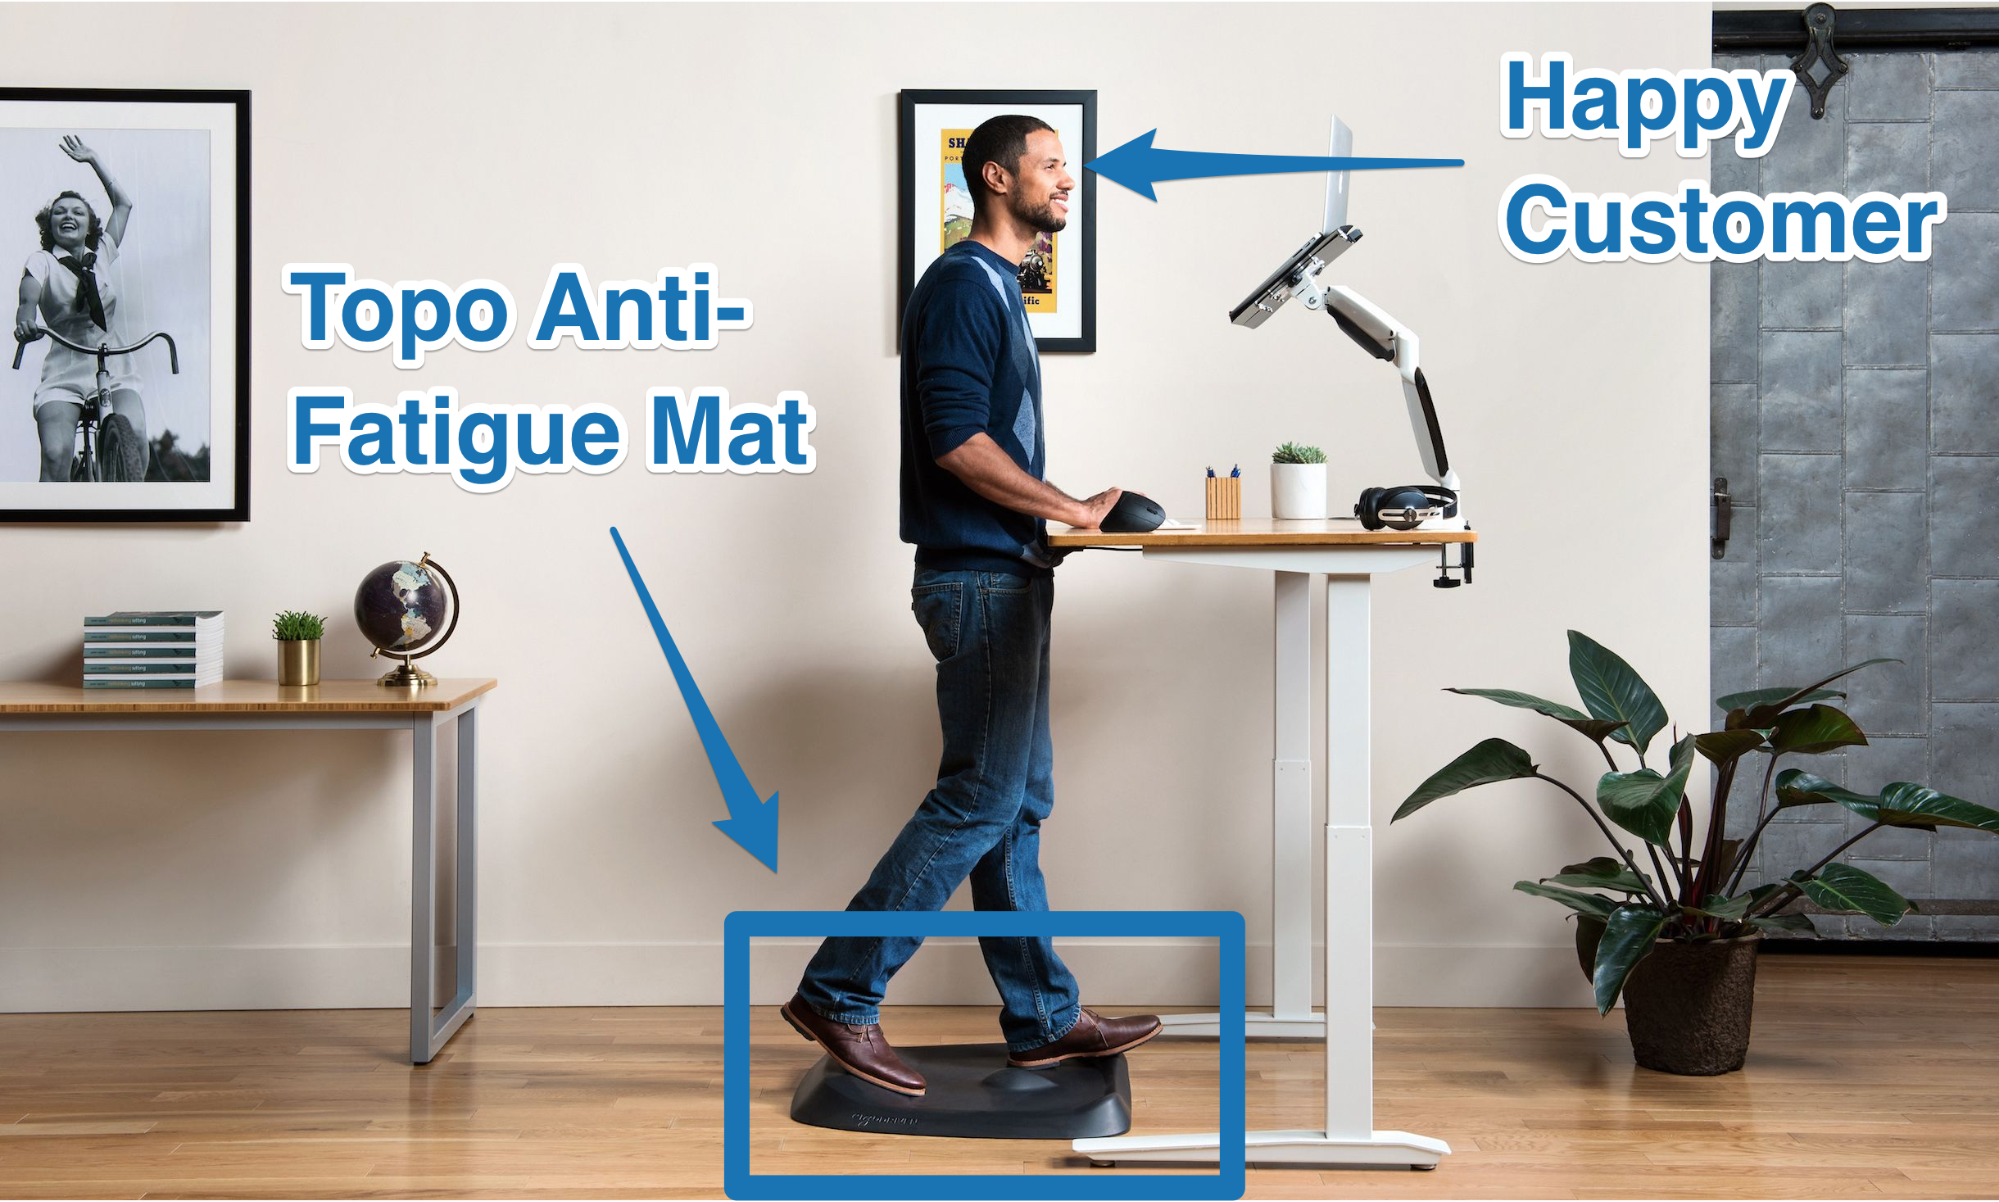 Picture of a man standing on a standing desk floor mat